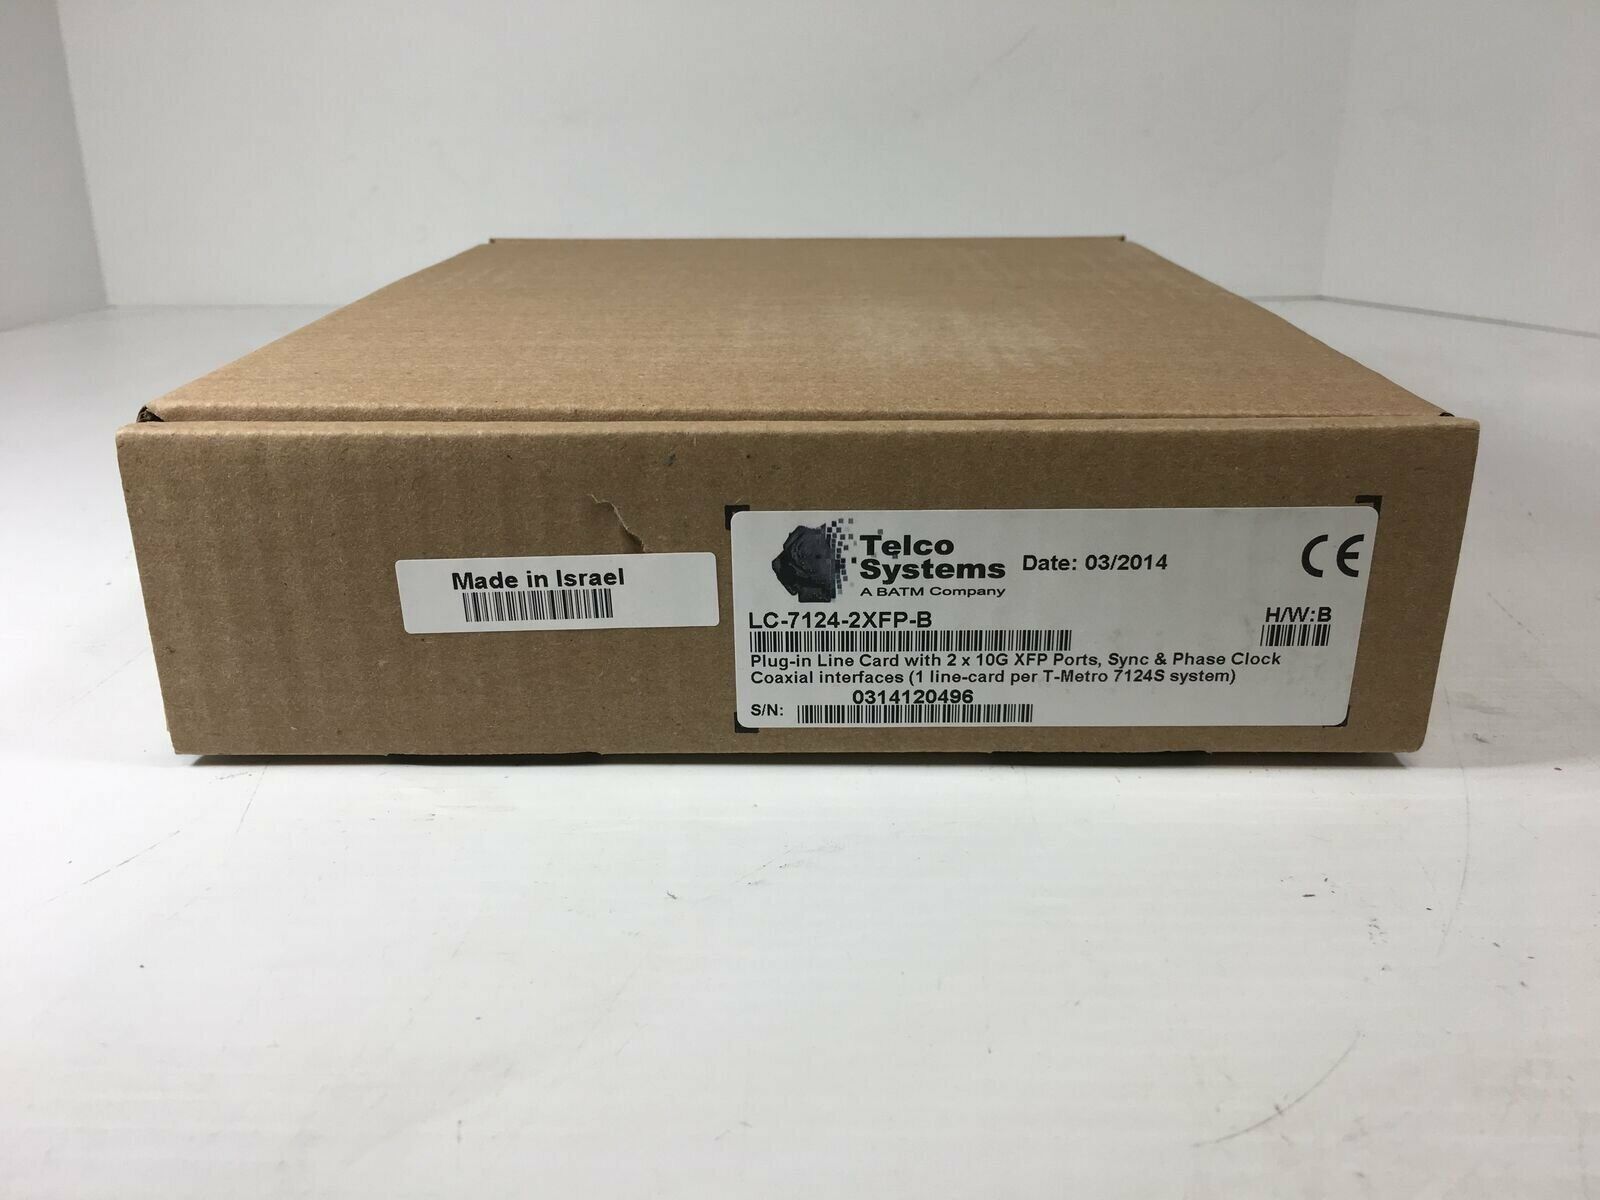 Telco Systems LC-7124-2XFP-B Plug-In Line Card 2x10G XFP Ports, Sync Phase Clock